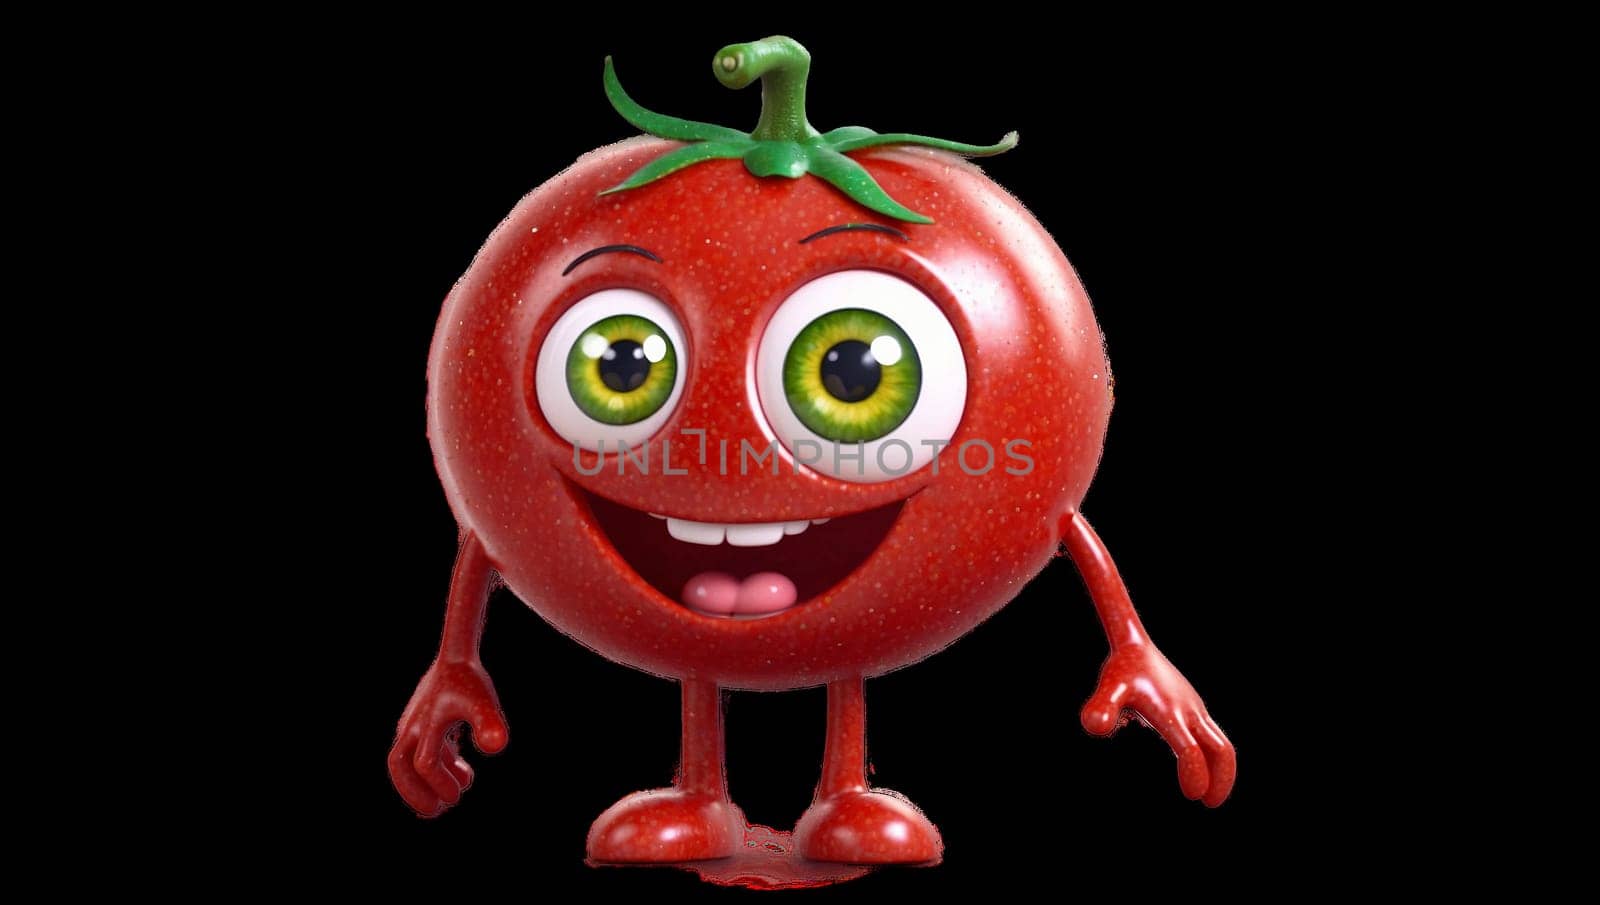 A tomato with human eyes smiling happily on a transparent background